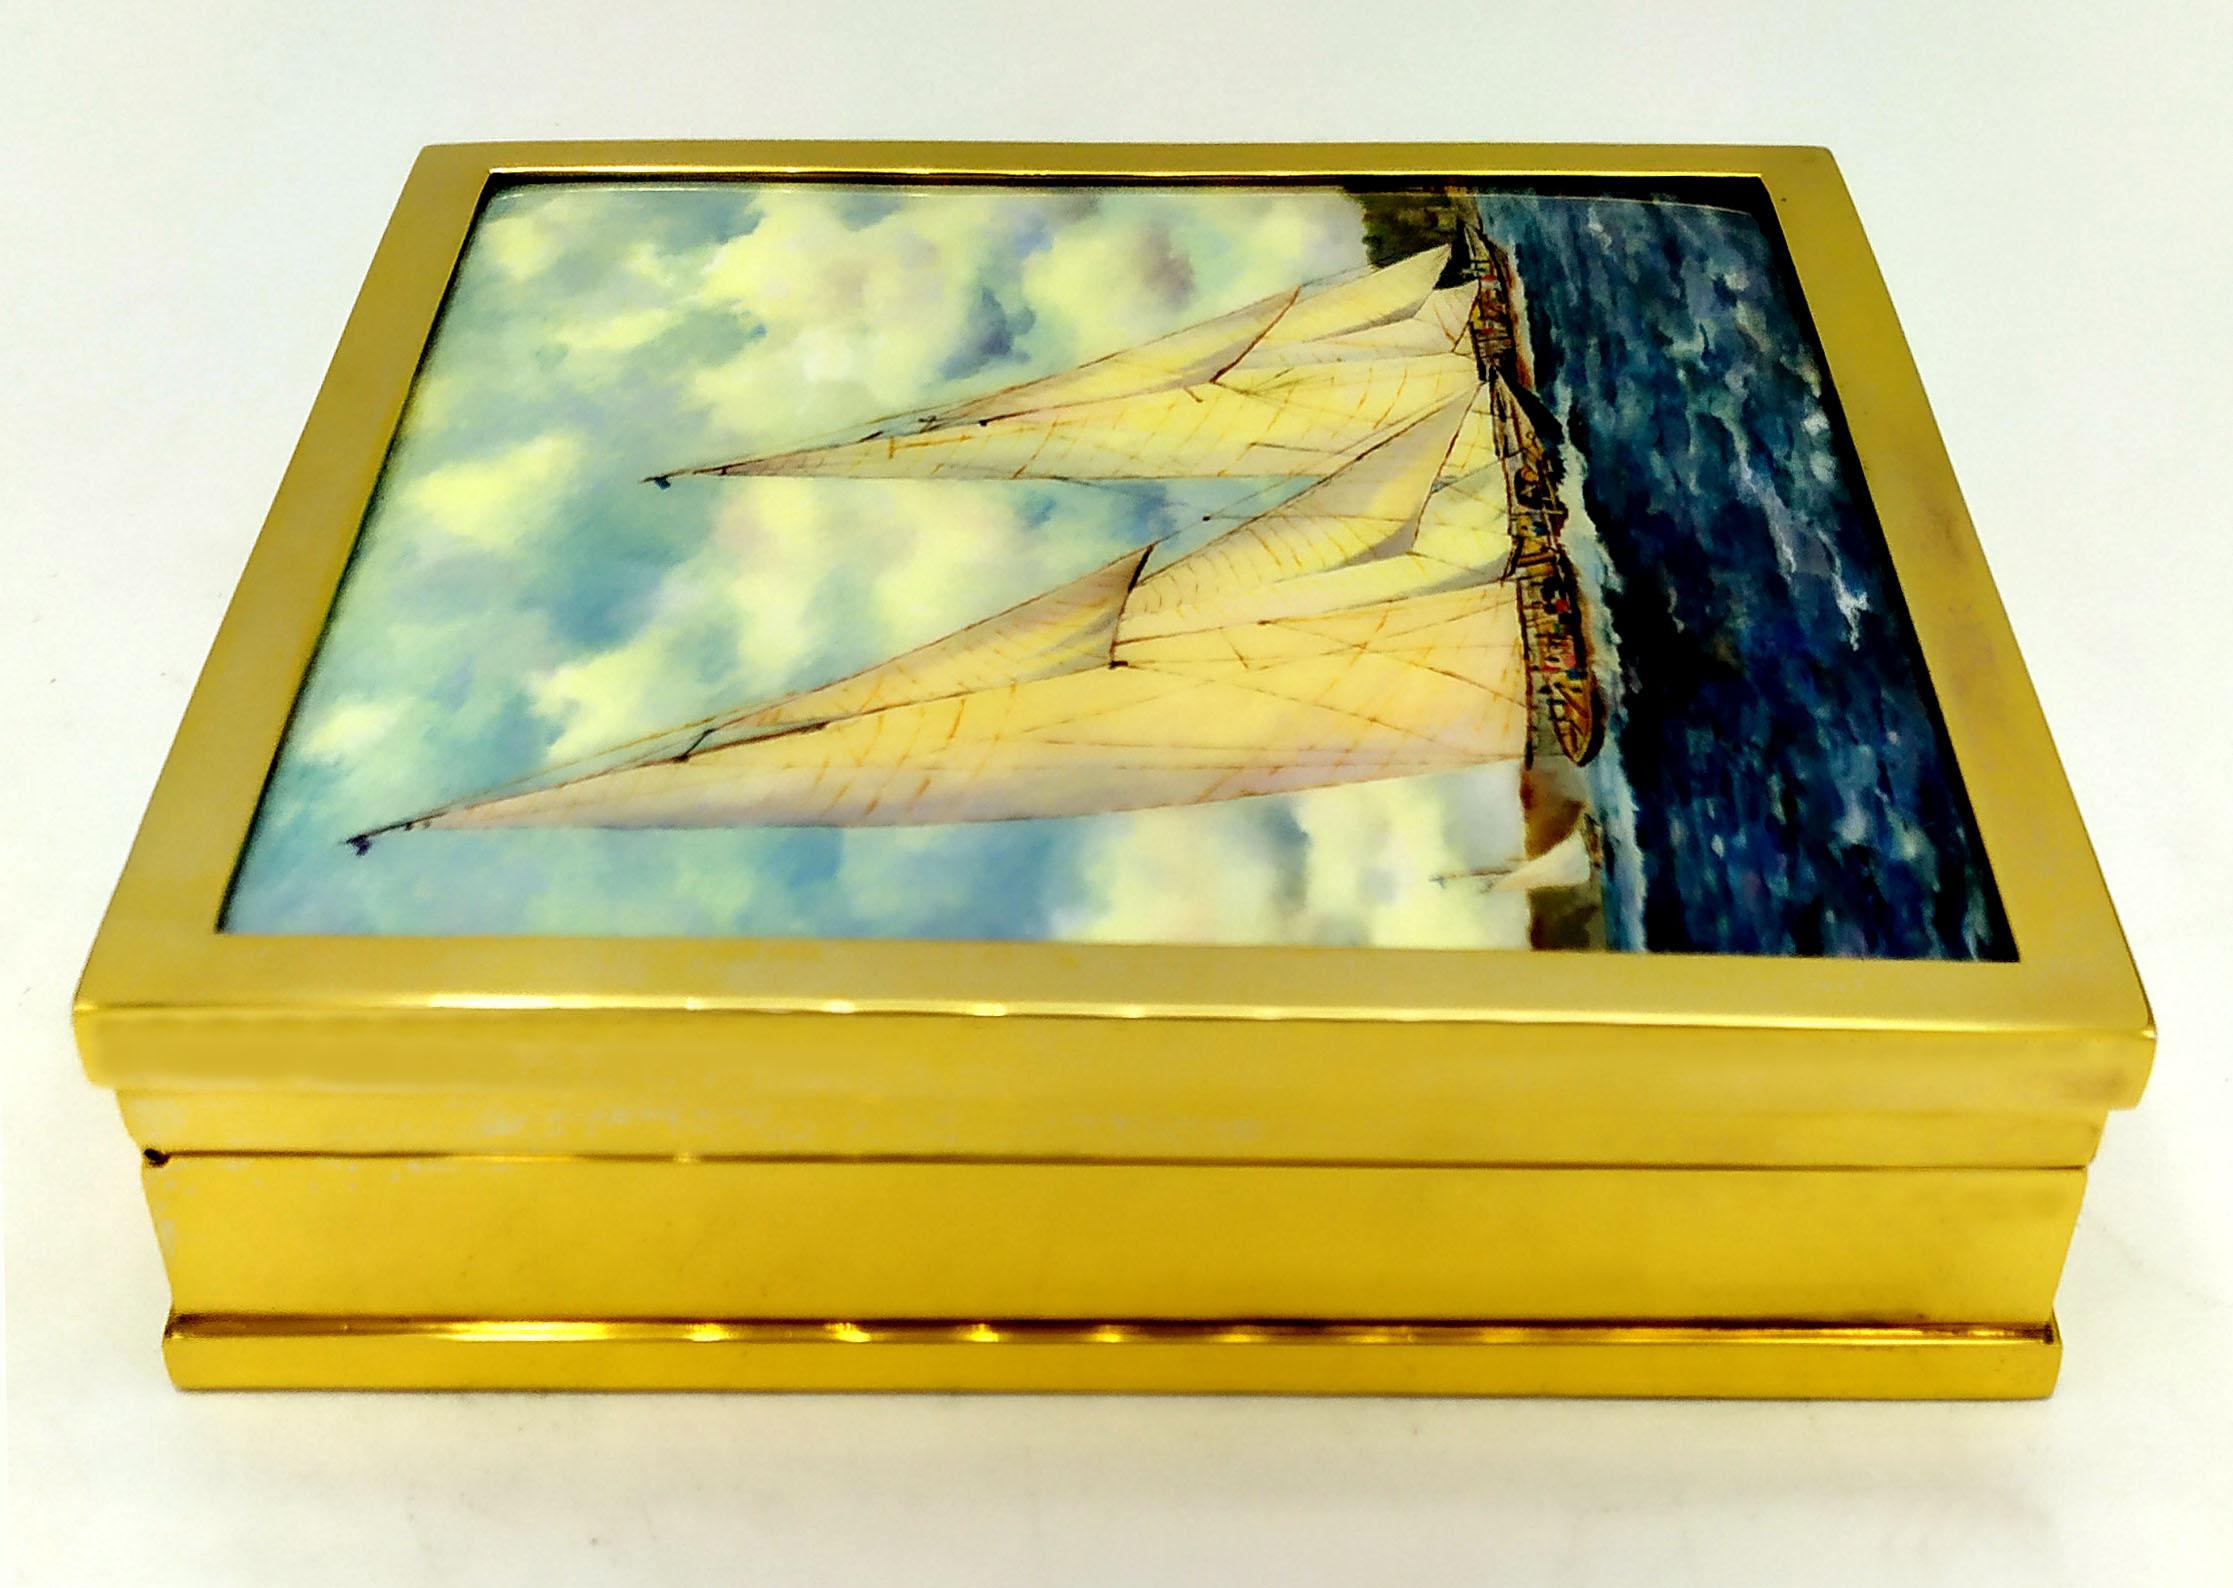 Table Box Sailing Boats miniature is in 925/1000 sterling.
Table Box Sailing Boats miniature has handpainted fired enamels miniature.
Table Box Sailing Boats miniature is squared.
Table Box Sailing Boats miniature is in Contemporary